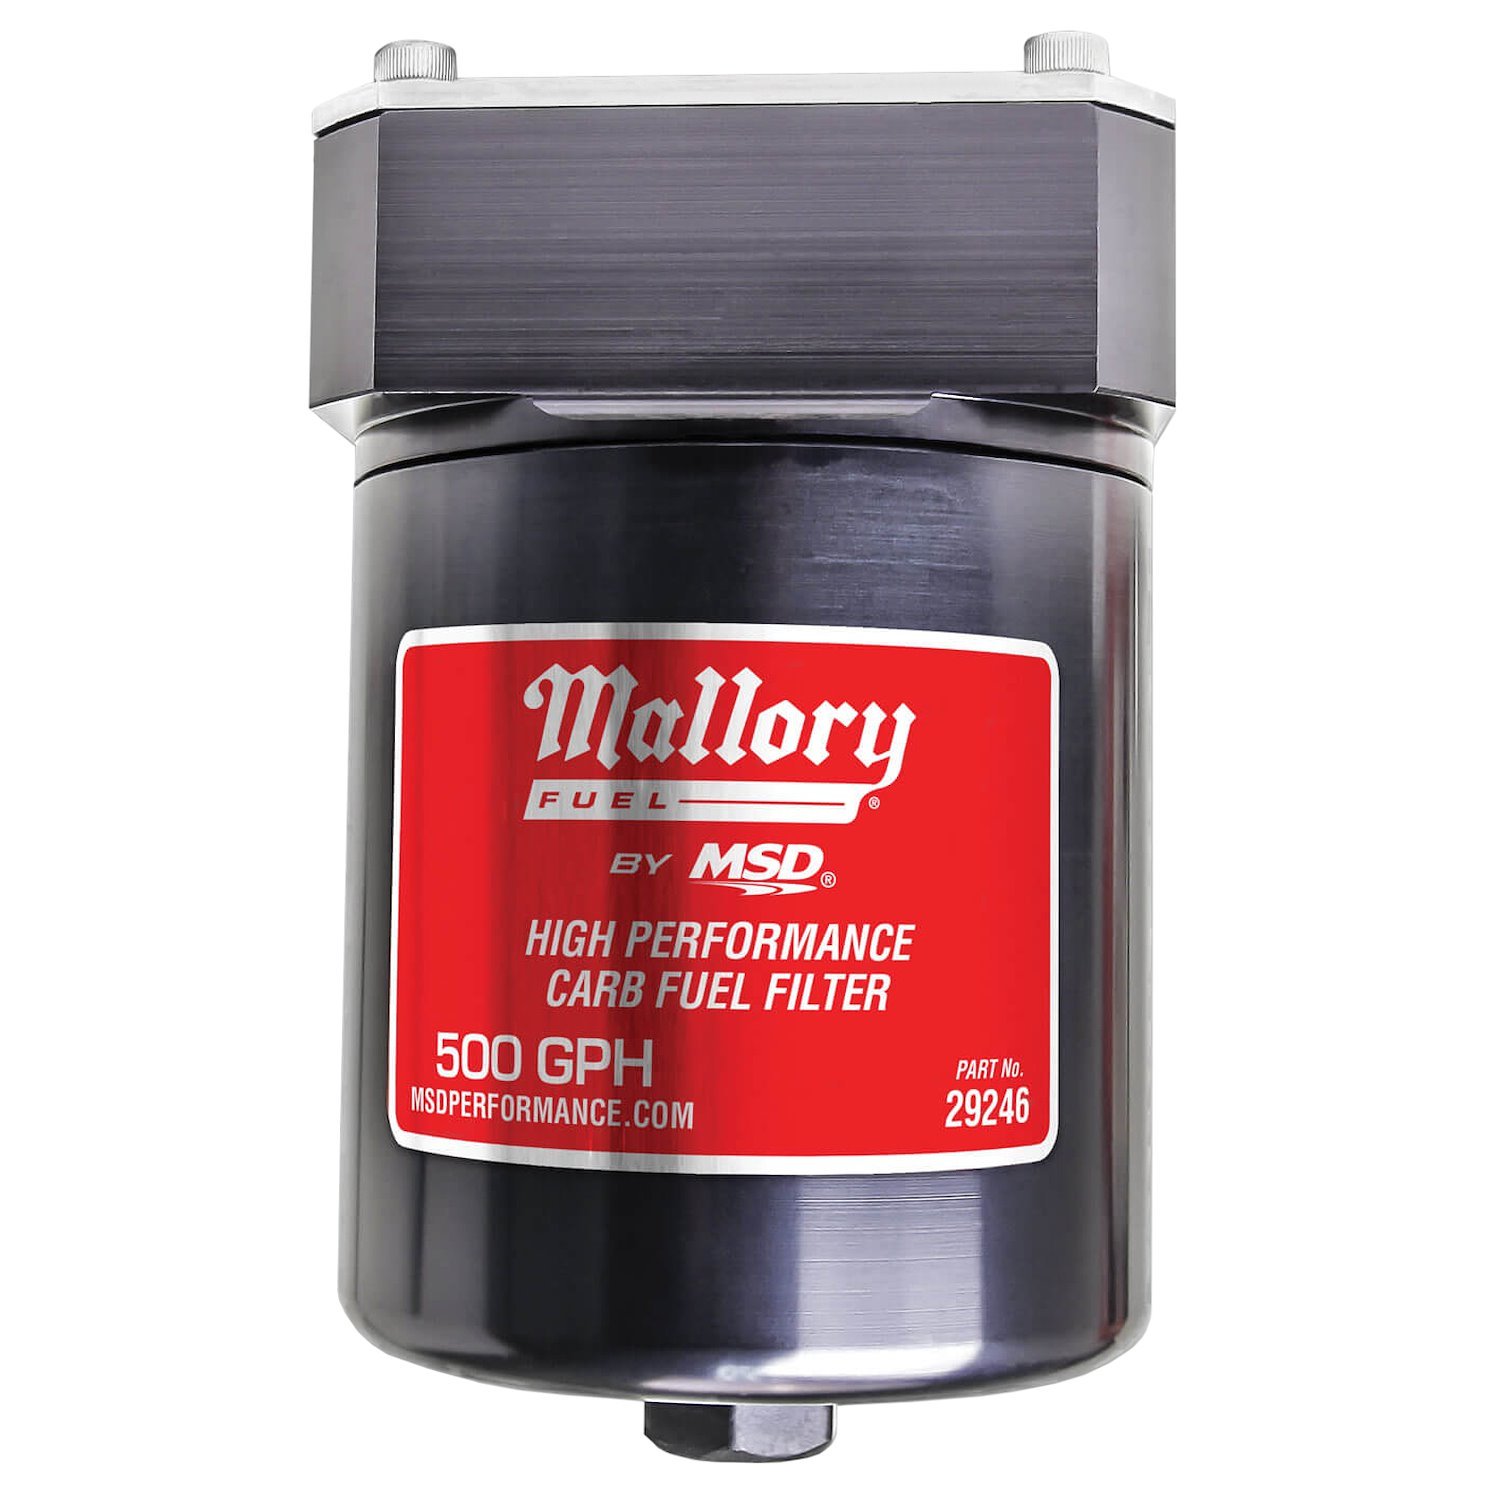 High Performance Carb Fuel Filter 40 Micron